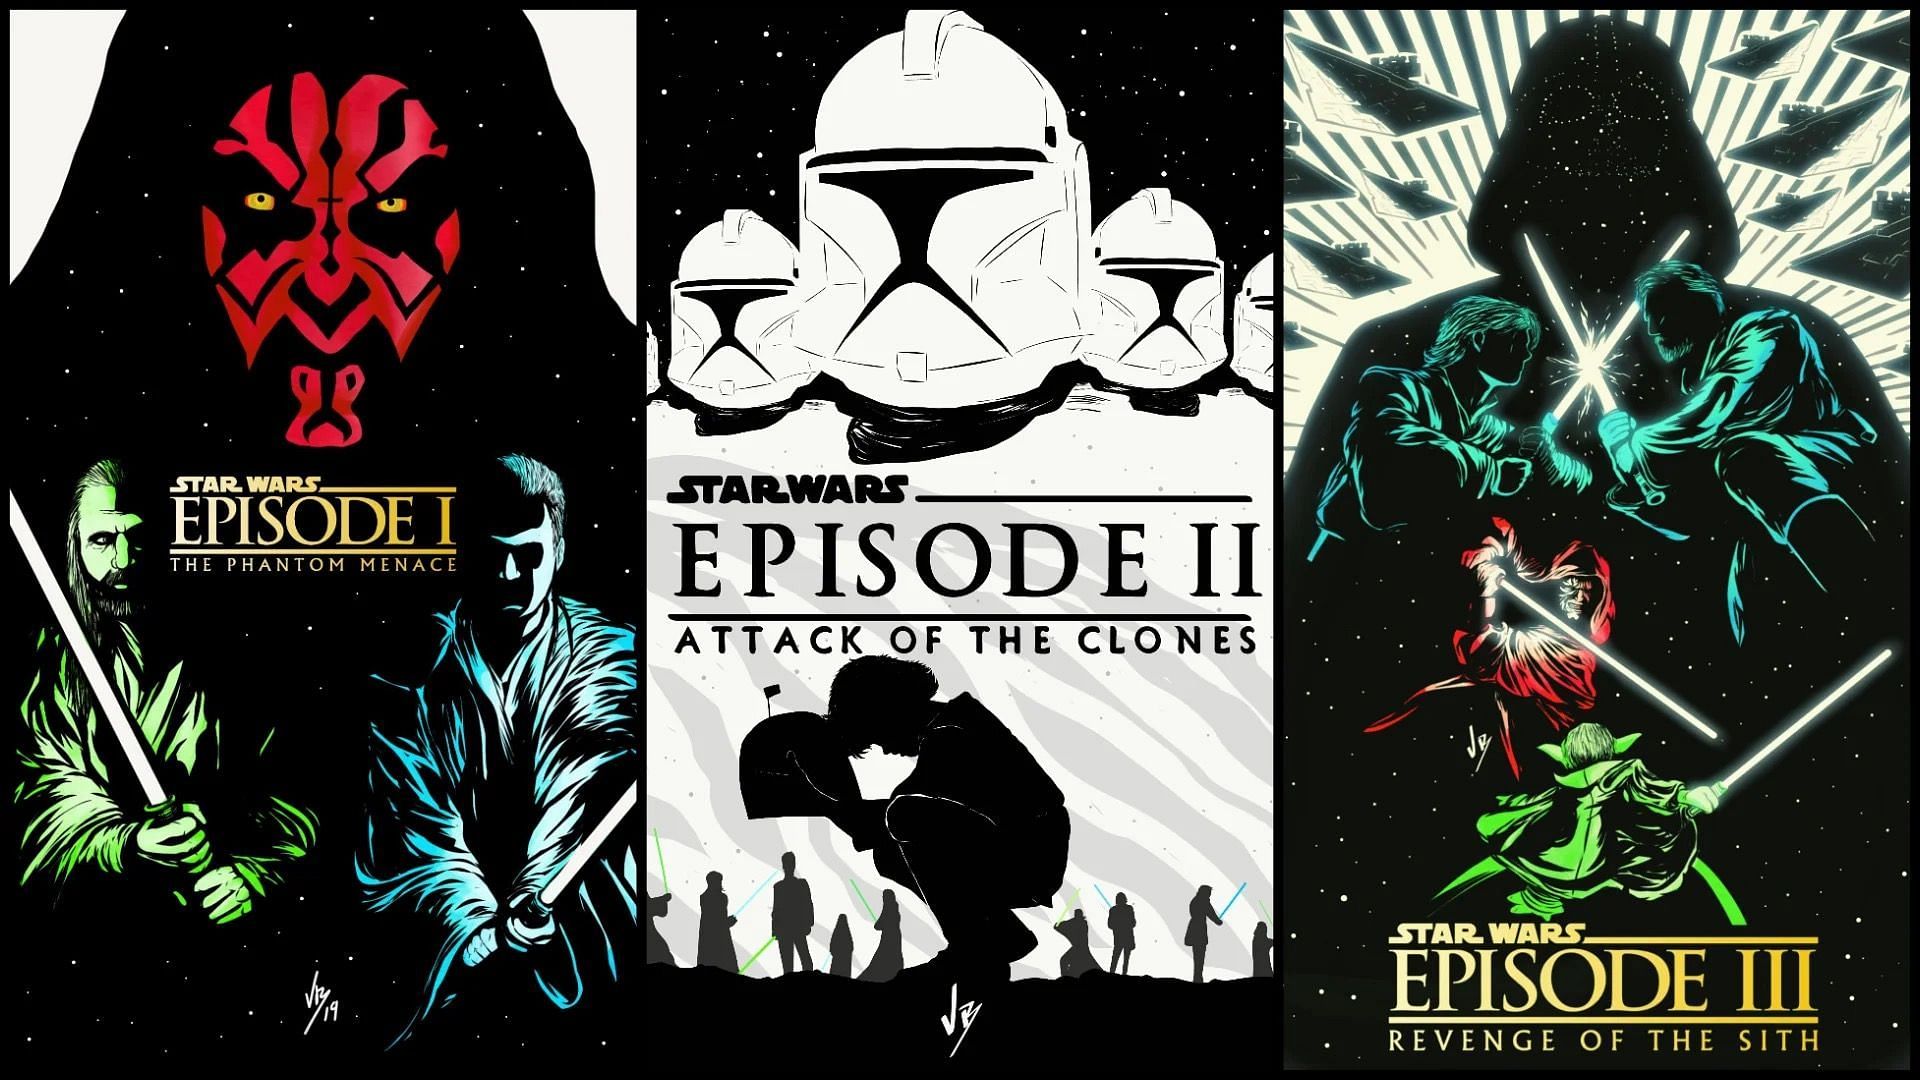 The posters for the prequels (Image via Lucasfilm)